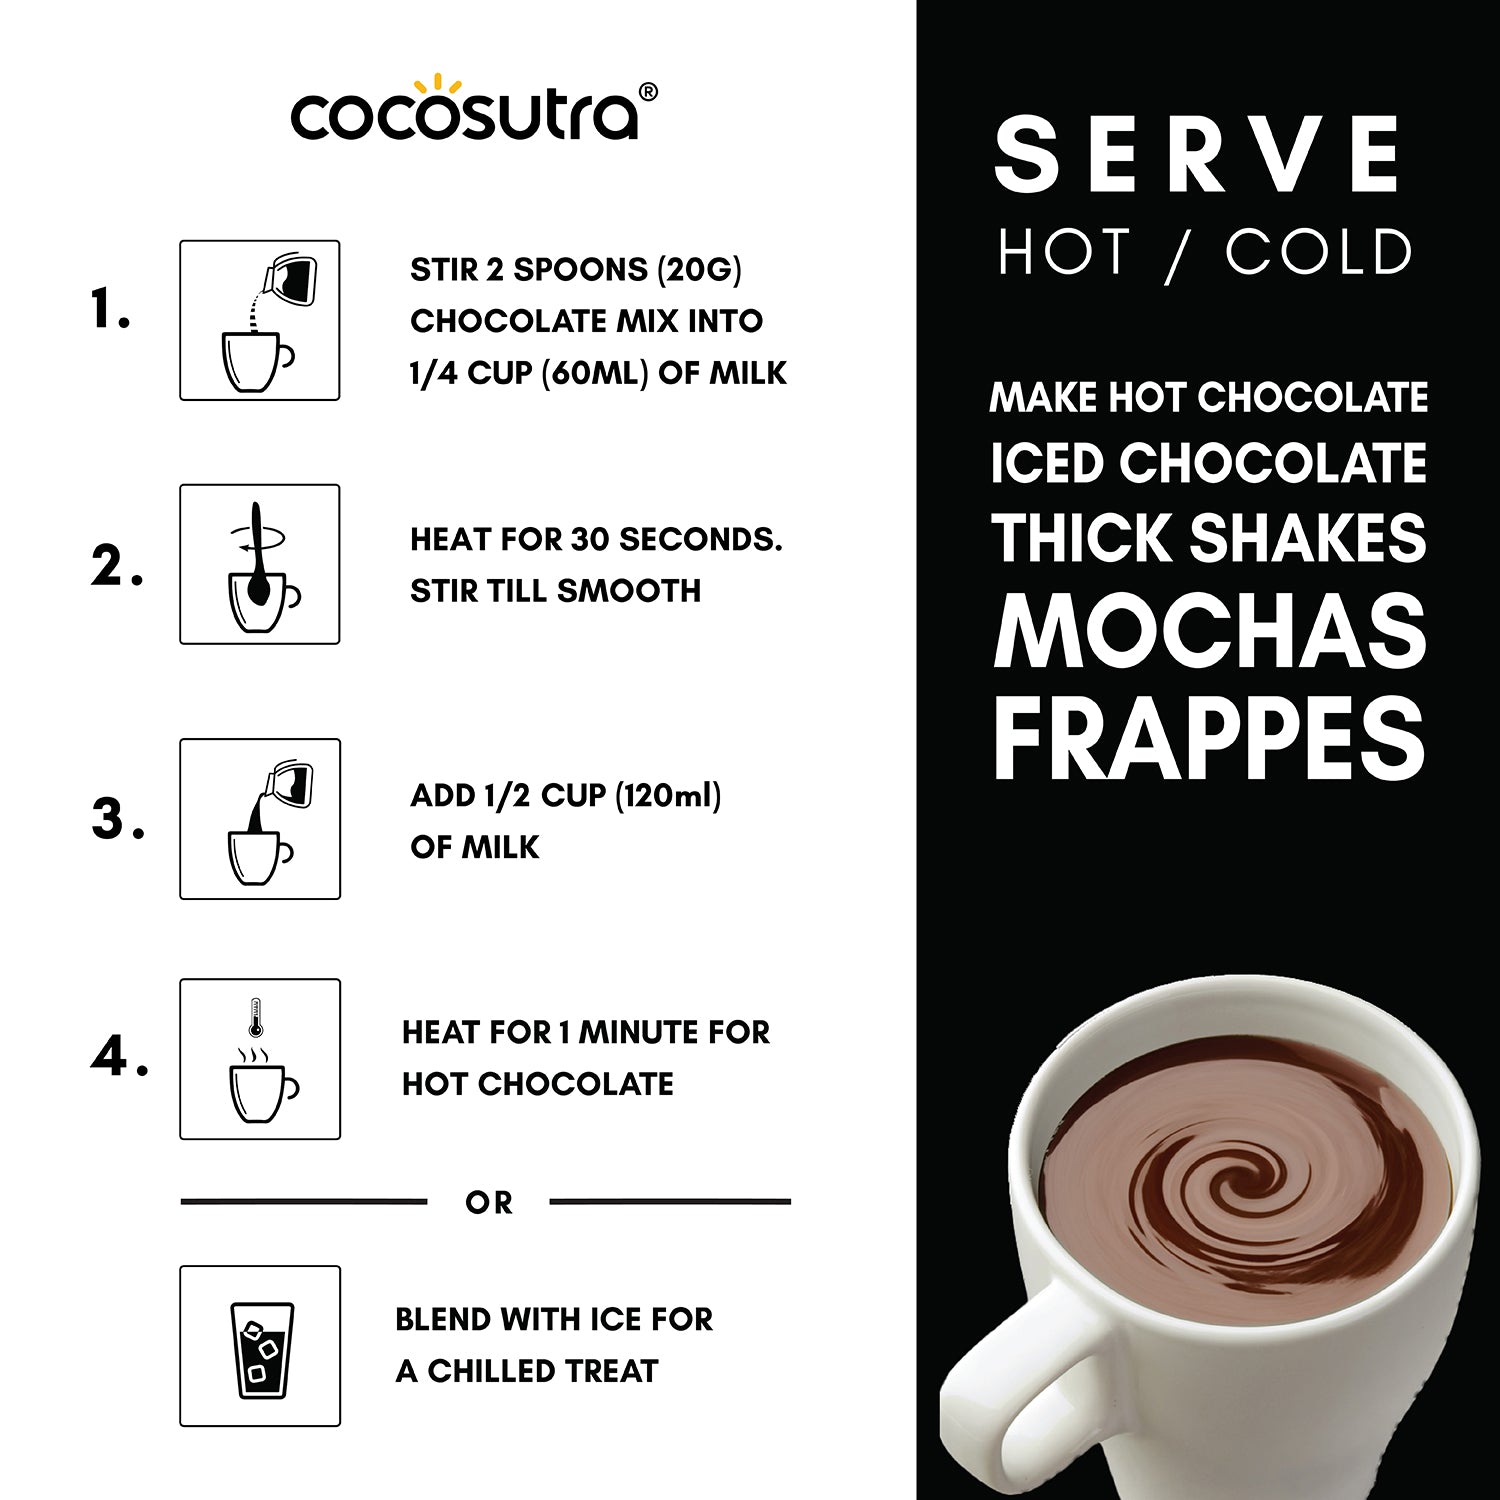 Hot Chocolate Recipe Instructions - Cocosutra